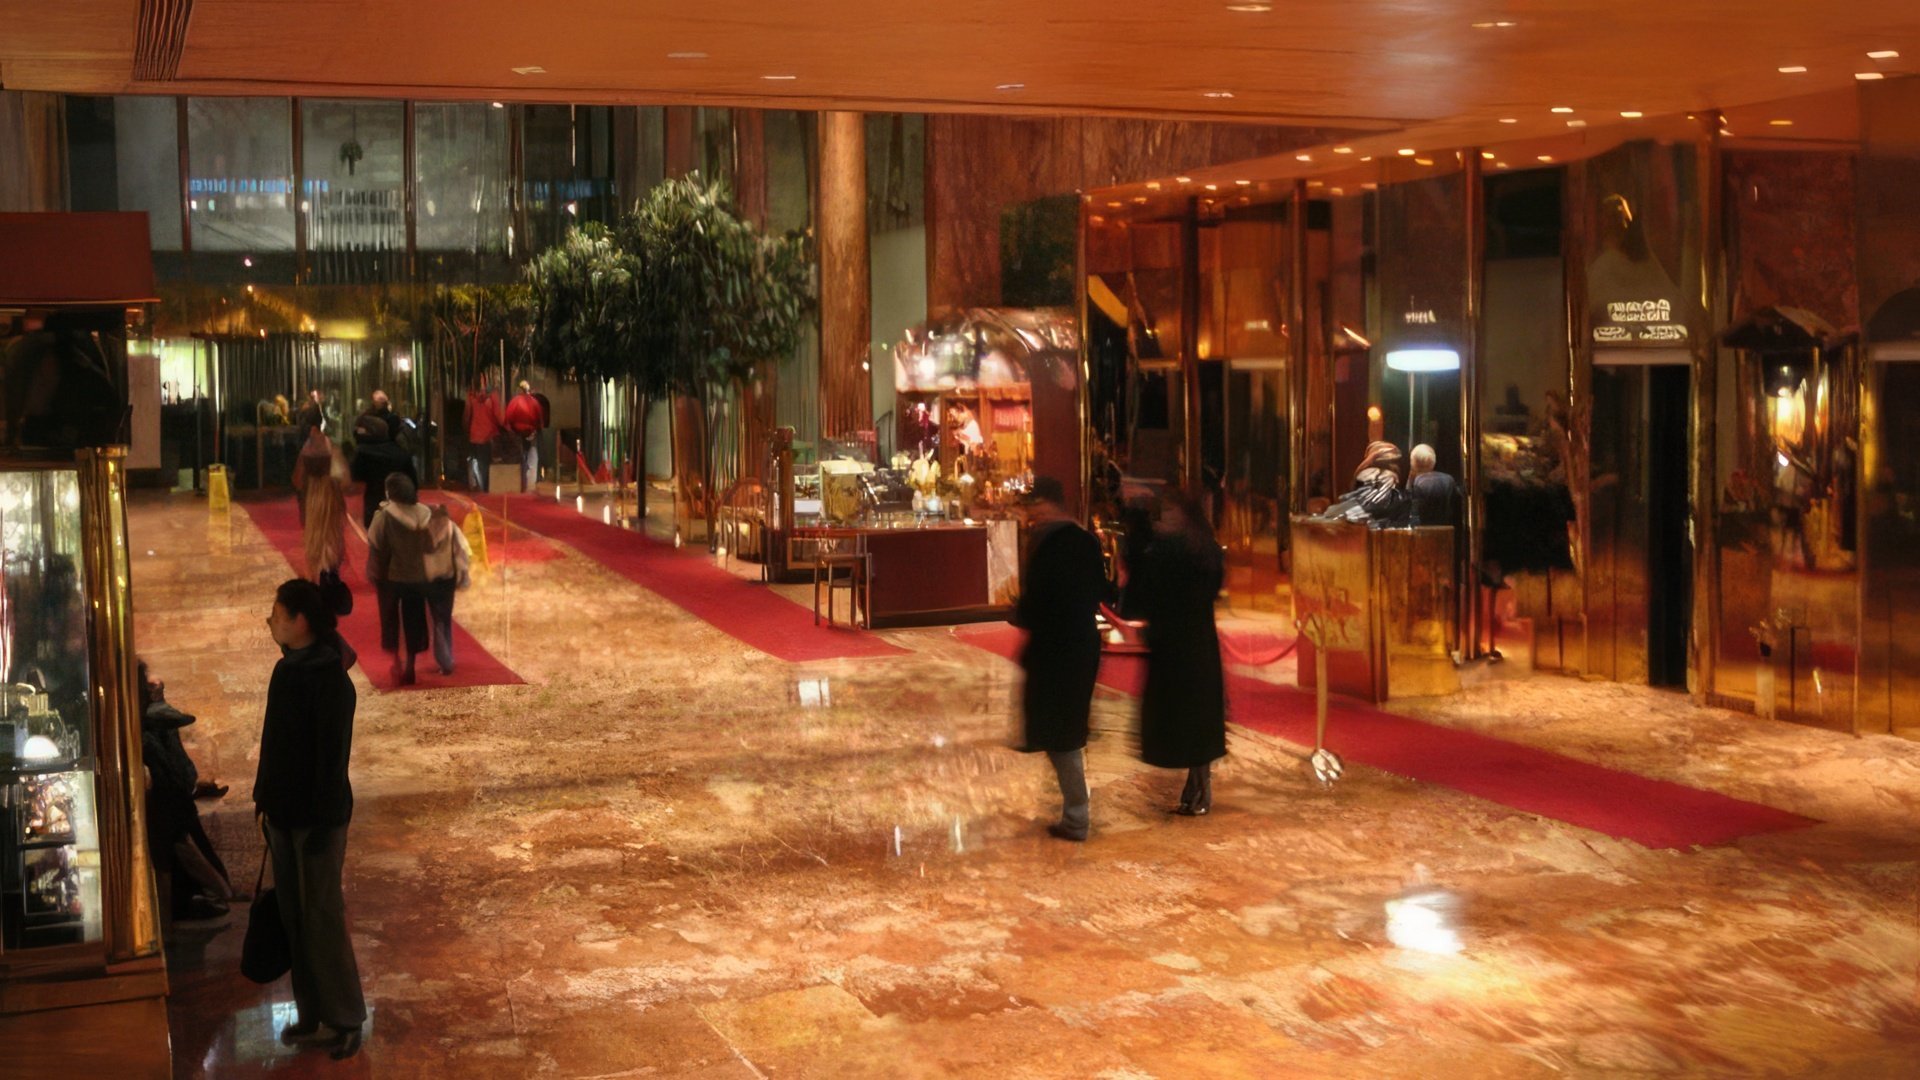 In one of the halls inside Trump Tower